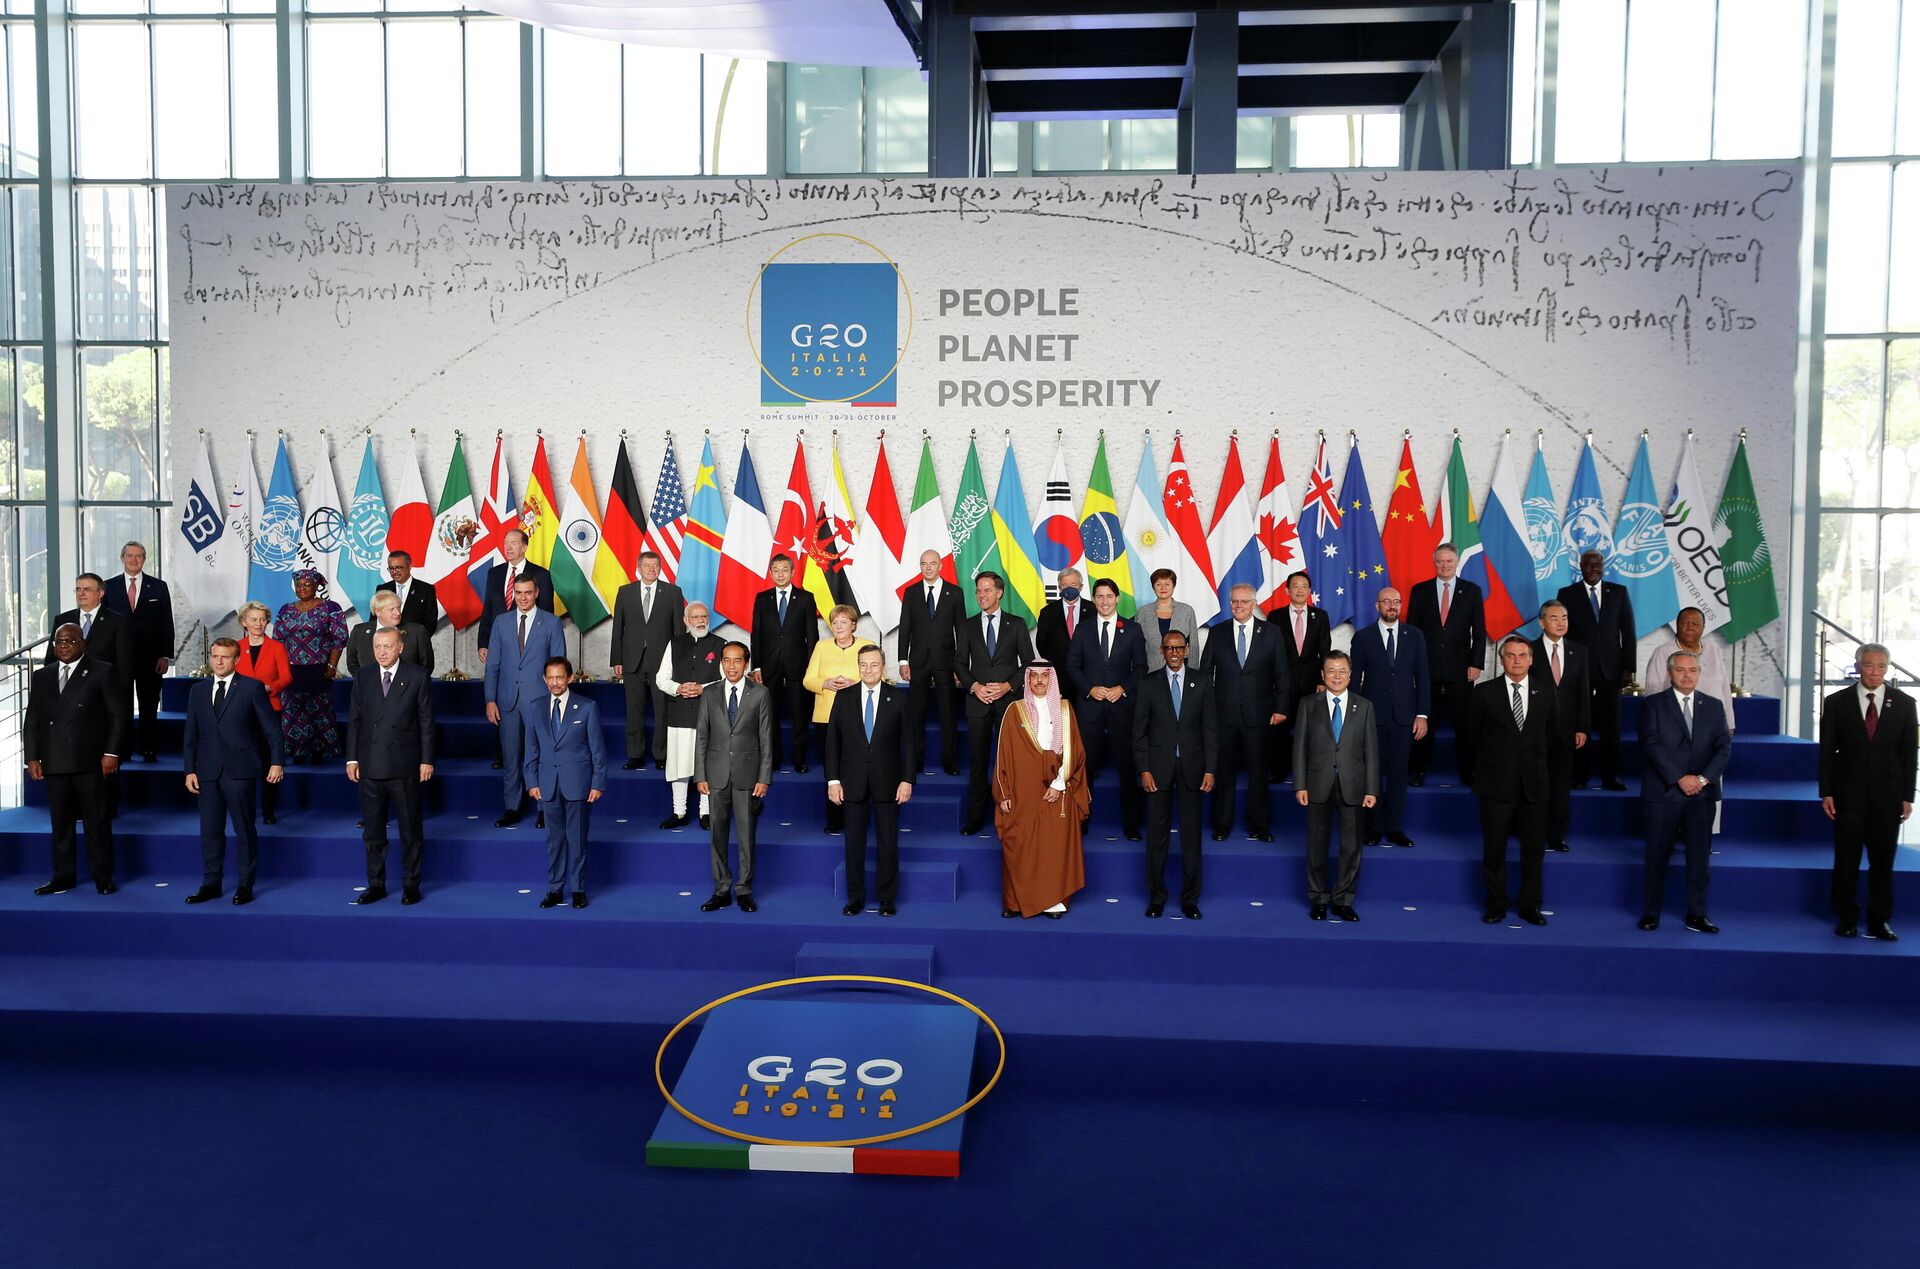 G20 state leaders pose during a family photo session at the start of the G20 summit in Rome, Italy, October 30, 2021. - Sputnik International, 1920, 01.11.2021